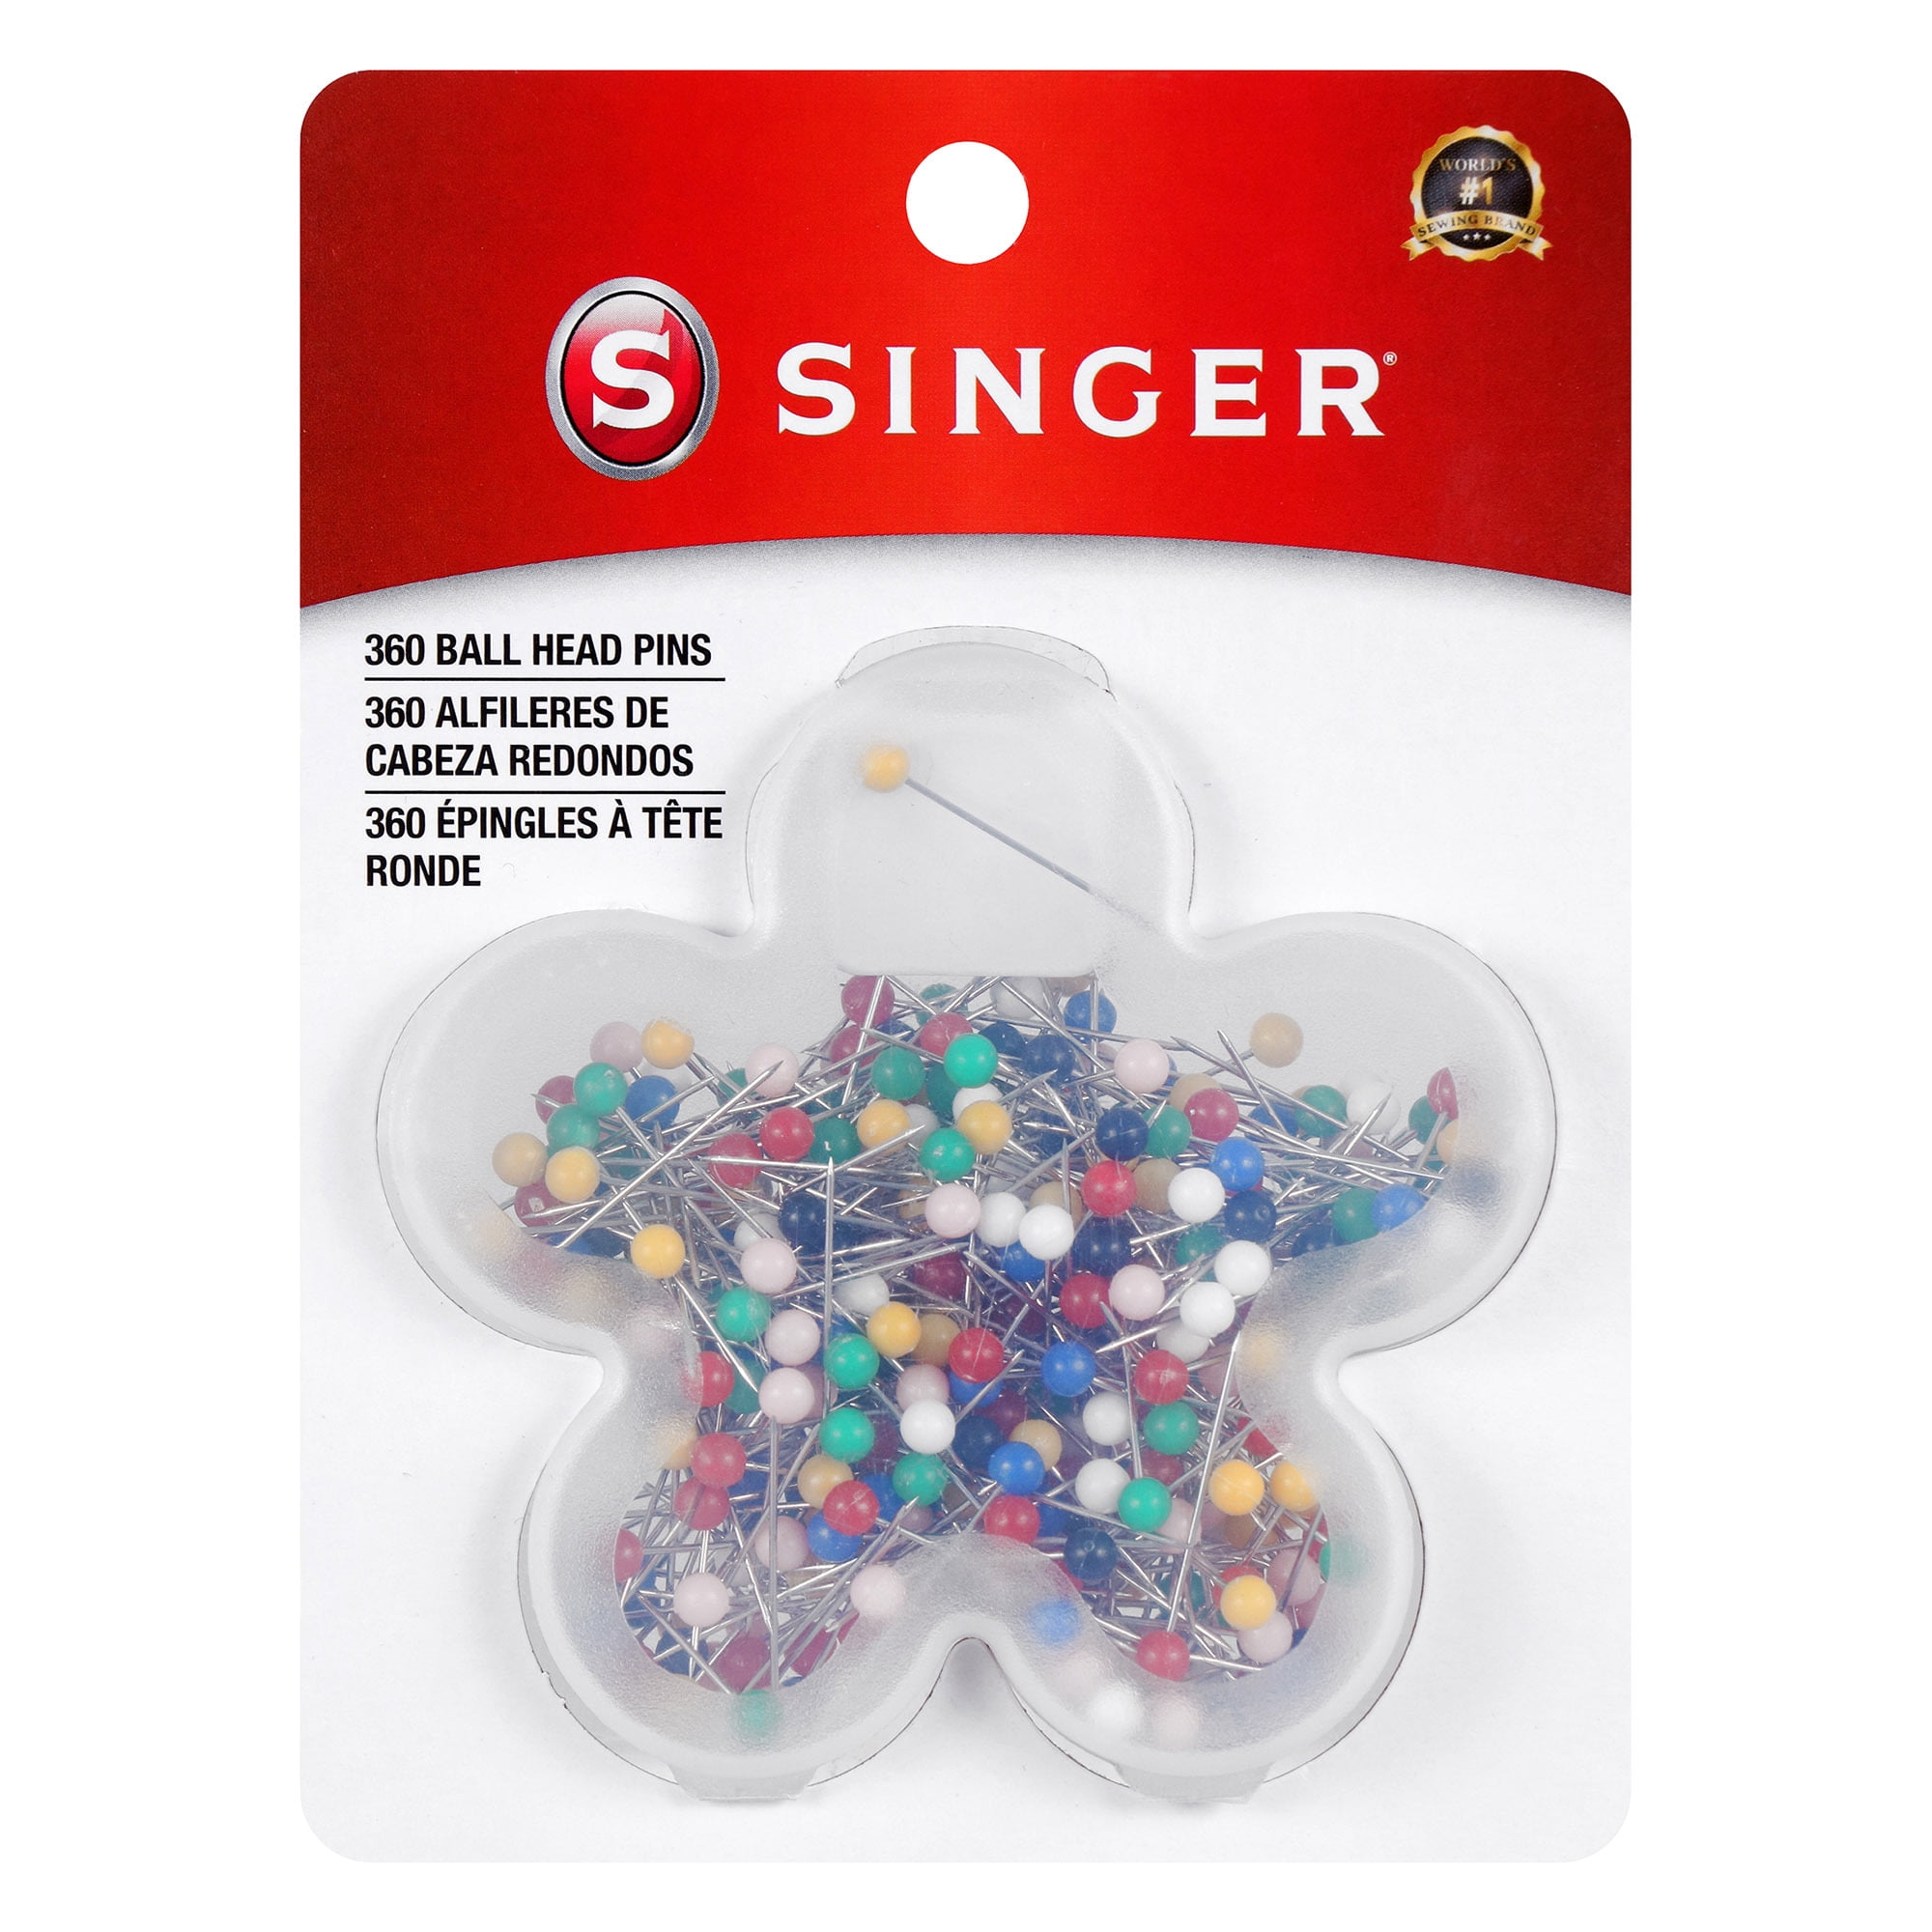 SINGER Ball Head Straight Pins in Transparent Flower-Shaped Storage Case - Size 17, 360 Count